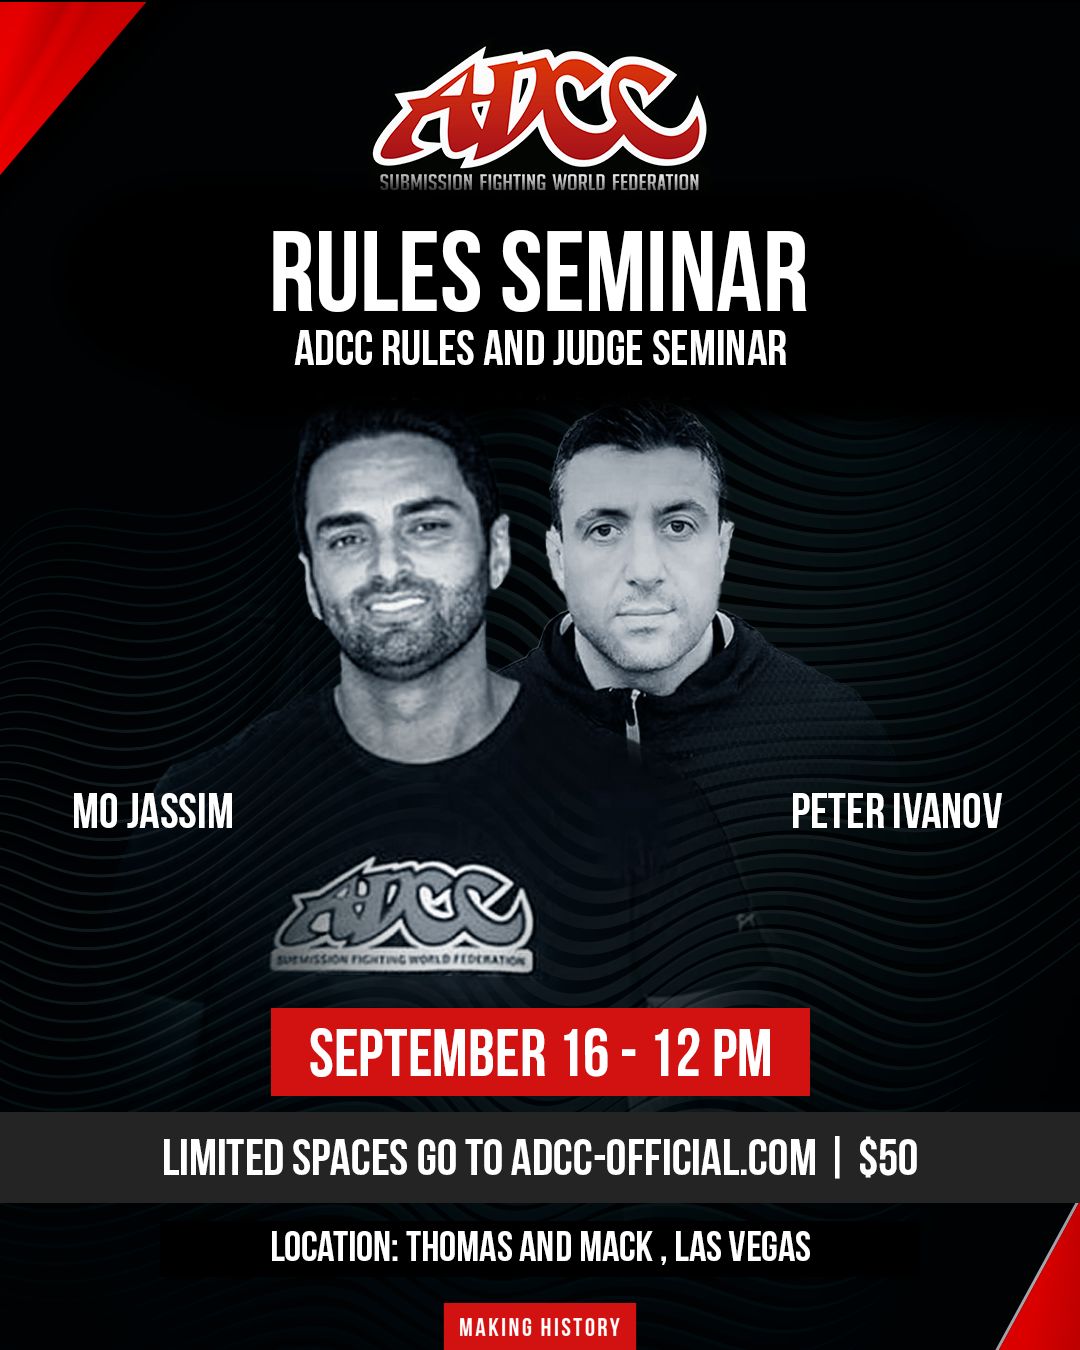 ADCC Rules and Judging seminar sept 16